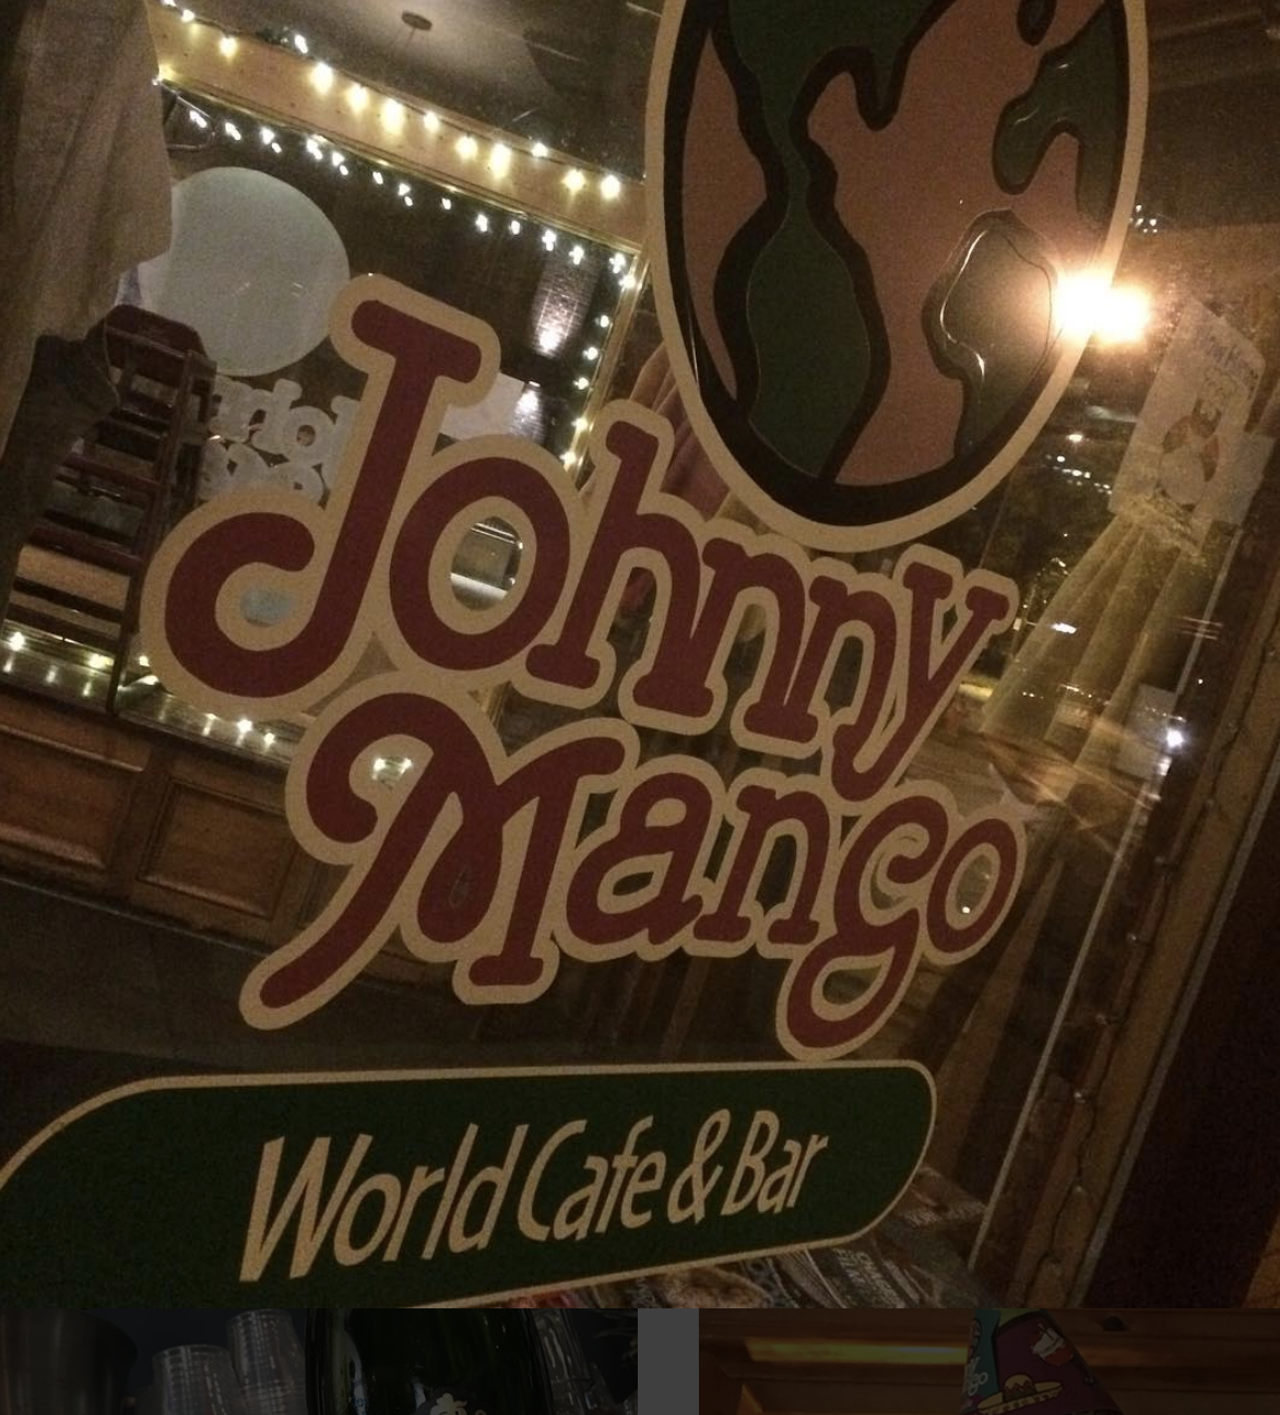 Johnny Mango World Cafe and Bar
3120 Bridge Ave., Cleveland
Johnny Mango is incredibly popular, largely because they really have something for everyone. With flavors inspired by Mexico, Asia and the Caribbean and stuffed with meatless and vegan options, they&#146;re set-up to cater to anyone in town. However, their space unfortunately doesn&#146;t accommodate all of Cleveland, so be prepared to plan ahead to nab a seat at the World Cafe.